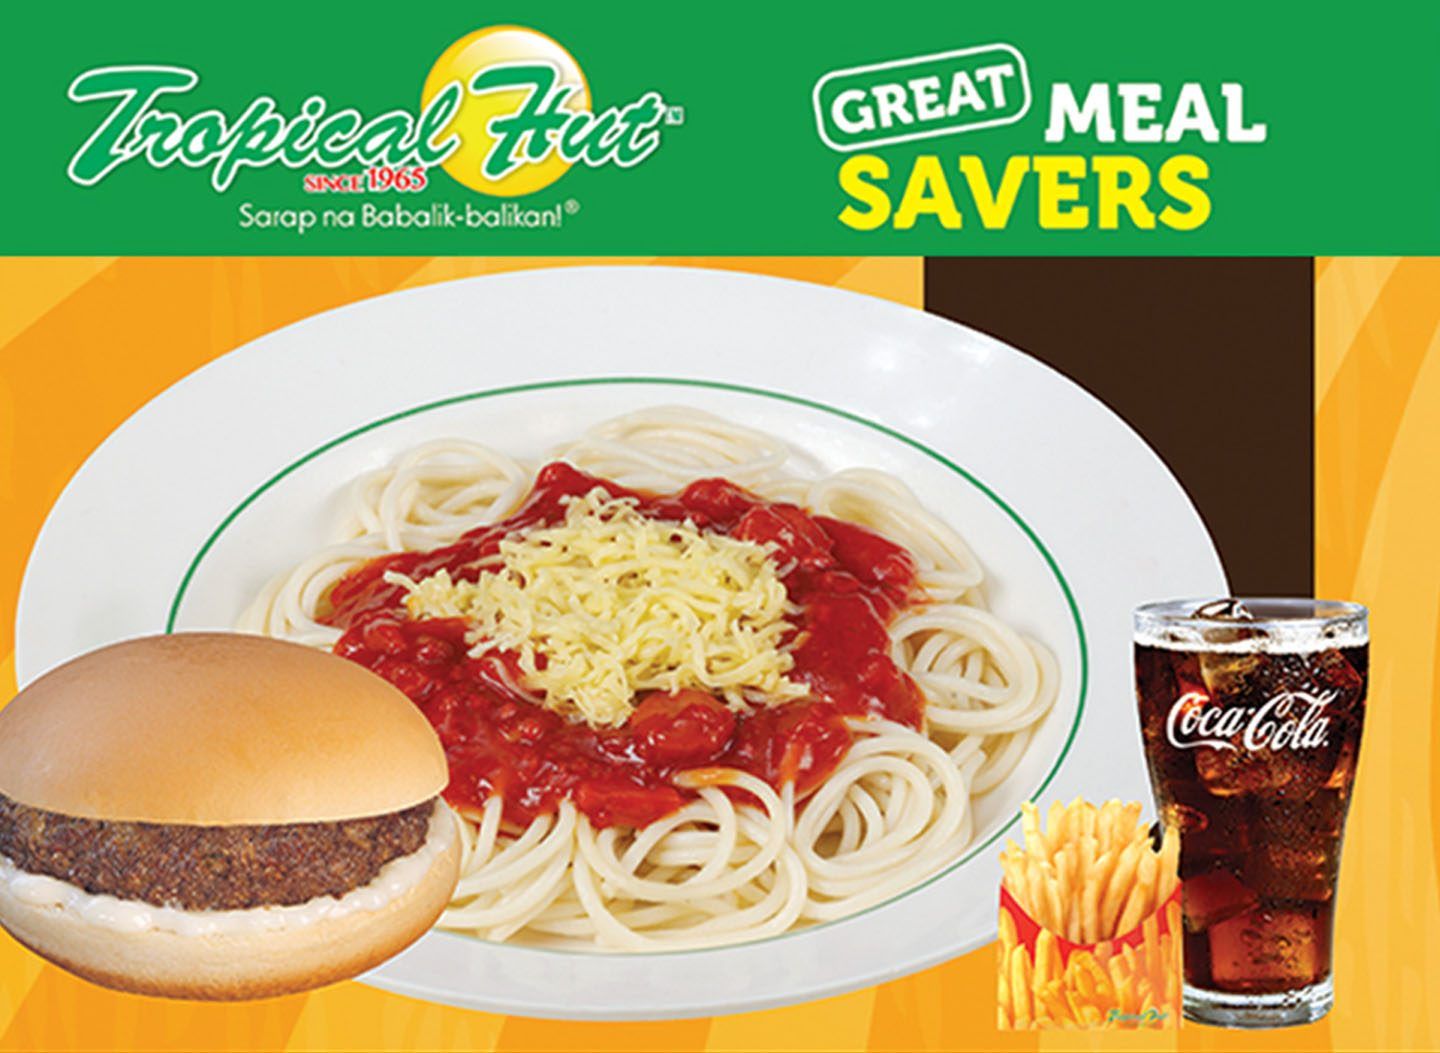 Great Meal Savers 1